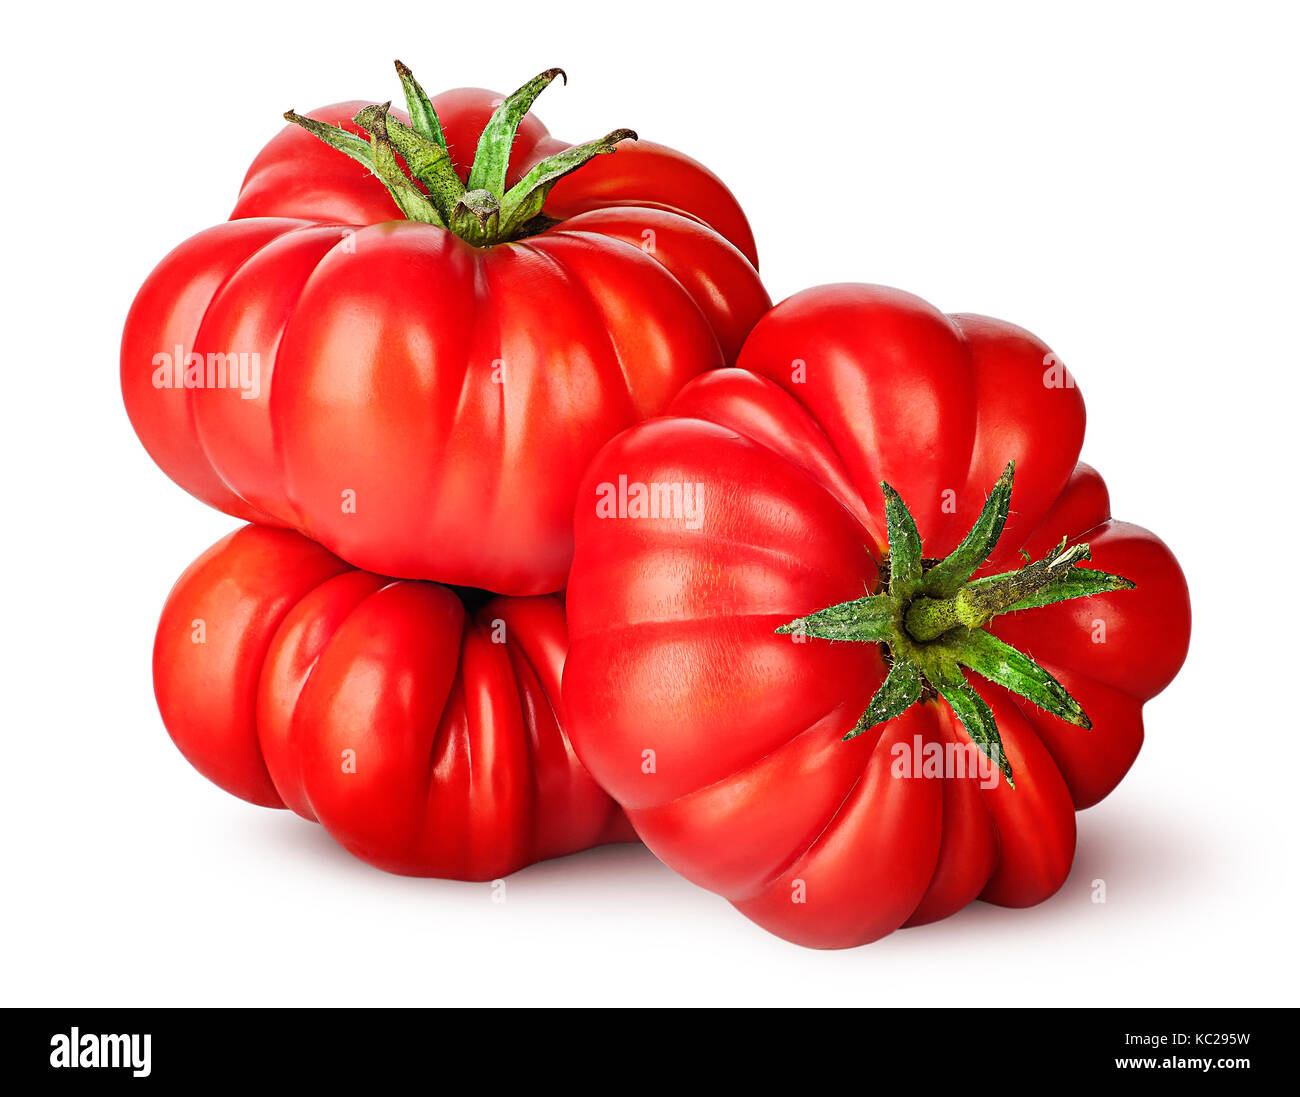 Three tomatoes next to each other Stock Photo